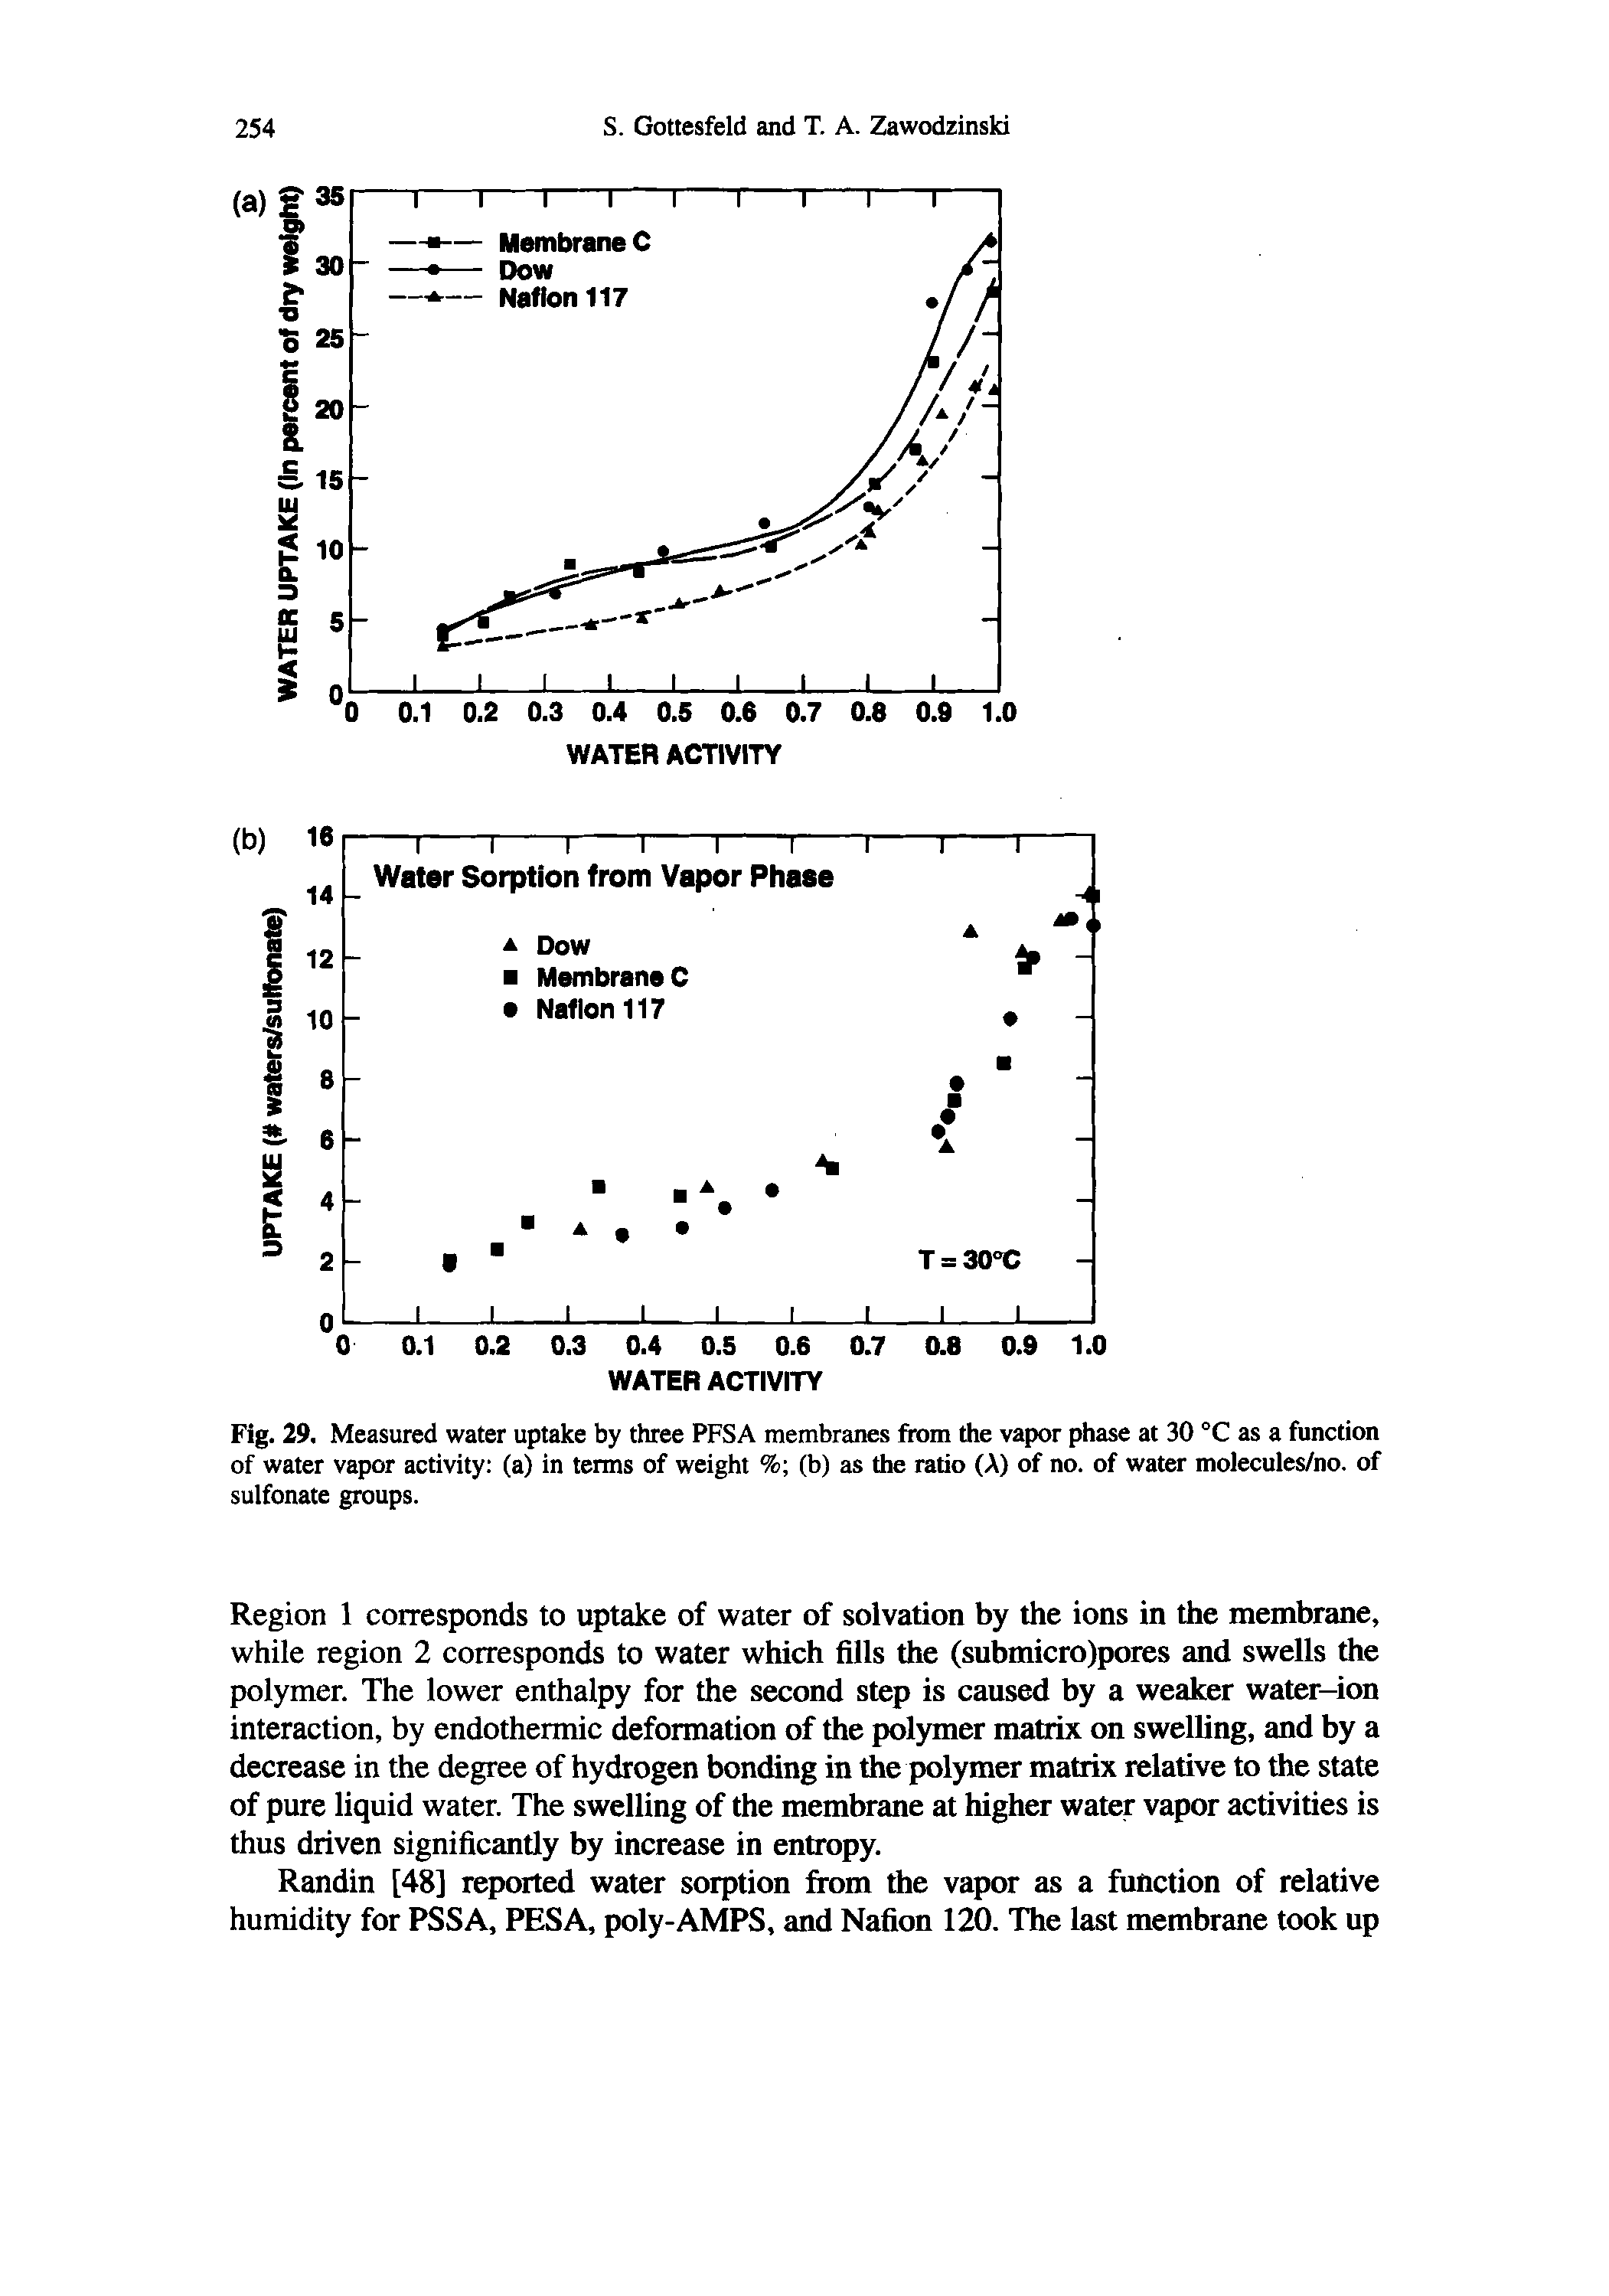 Fig. 29. Measured water uptake by three PFSA membranes from the vapor phase at 30 °C as a function of water vapor activity (a) in terms of weight % (b) as the ratio (A) of no. of water molecules/no. of sulfonate groups.